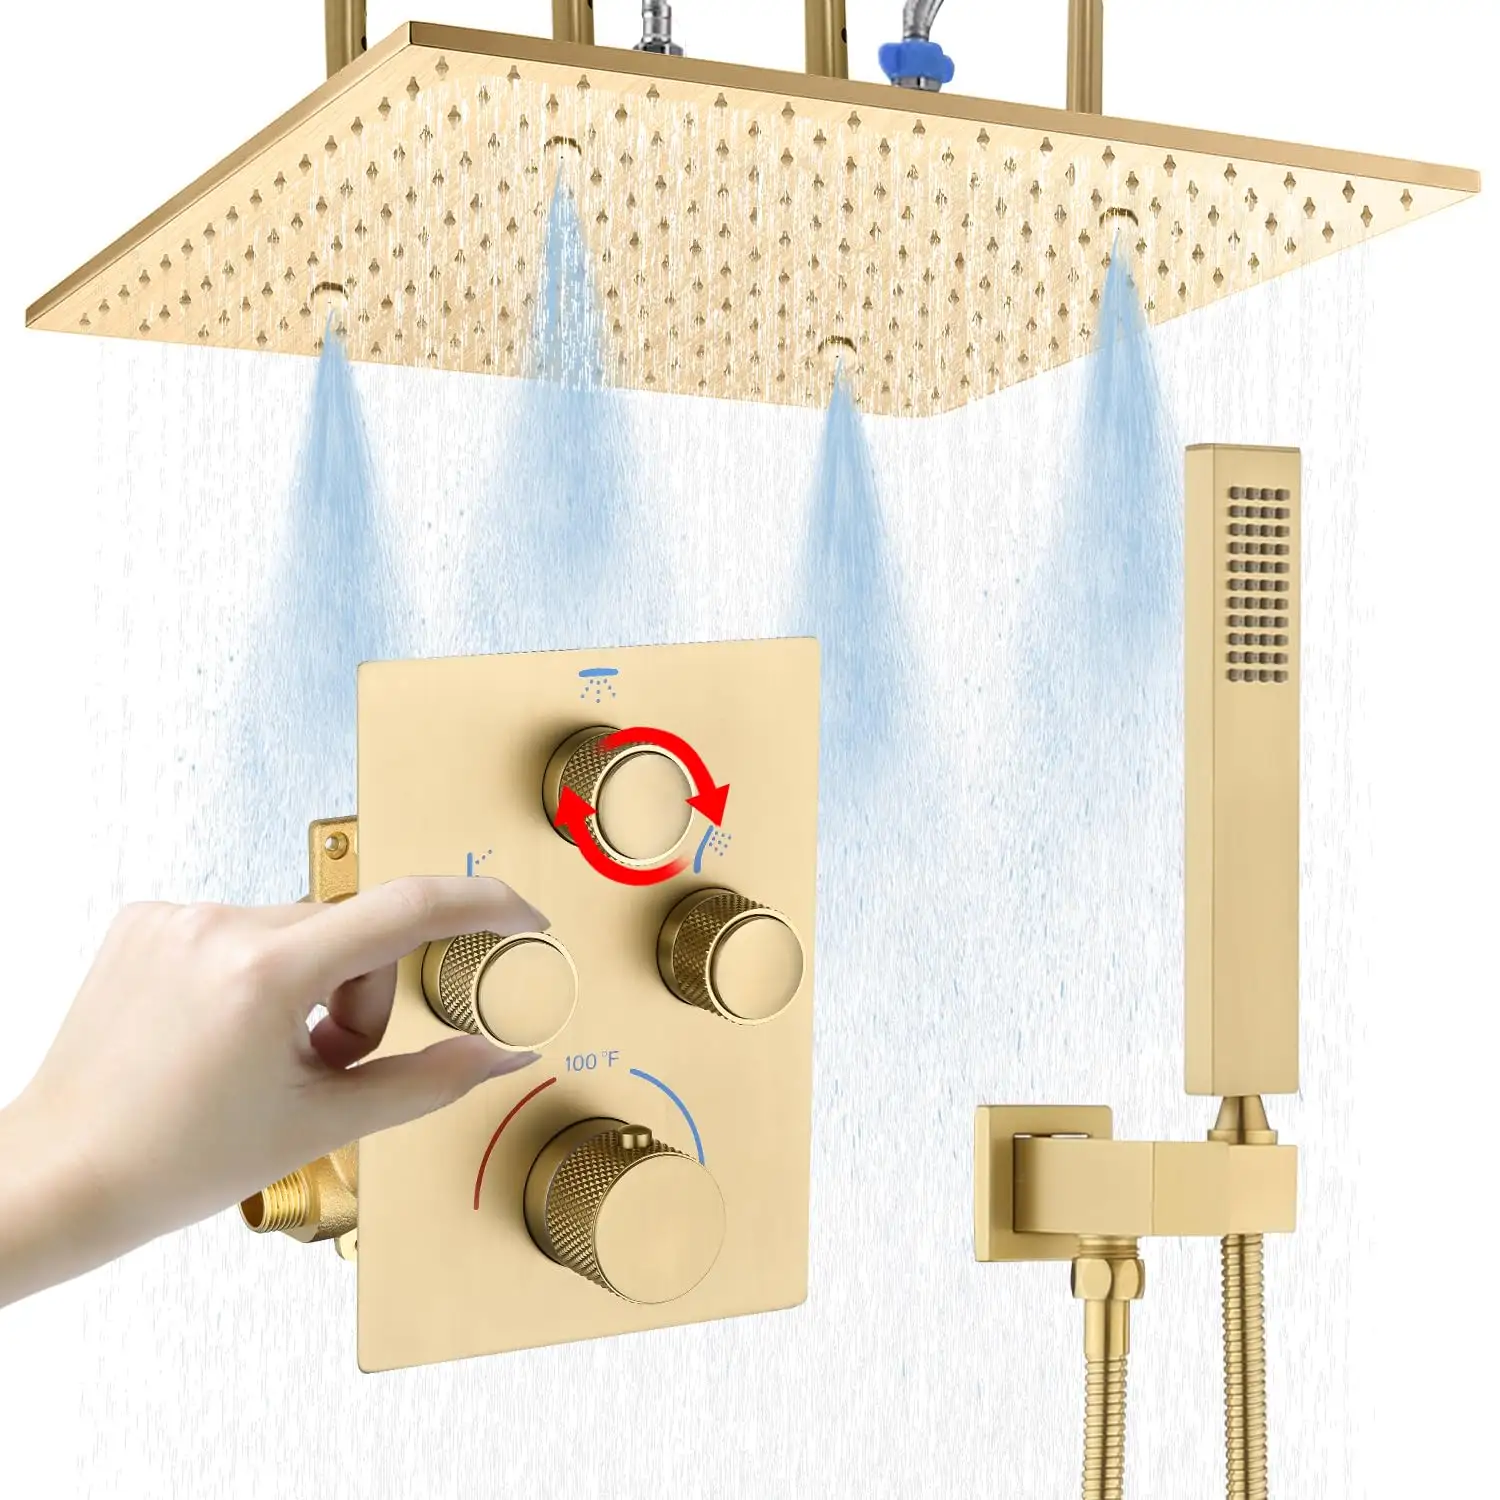 16 Inch Rain ceiling Overhead Shower Head Shower Faucet Set Brushed Gold Thermostatic Shower System sets